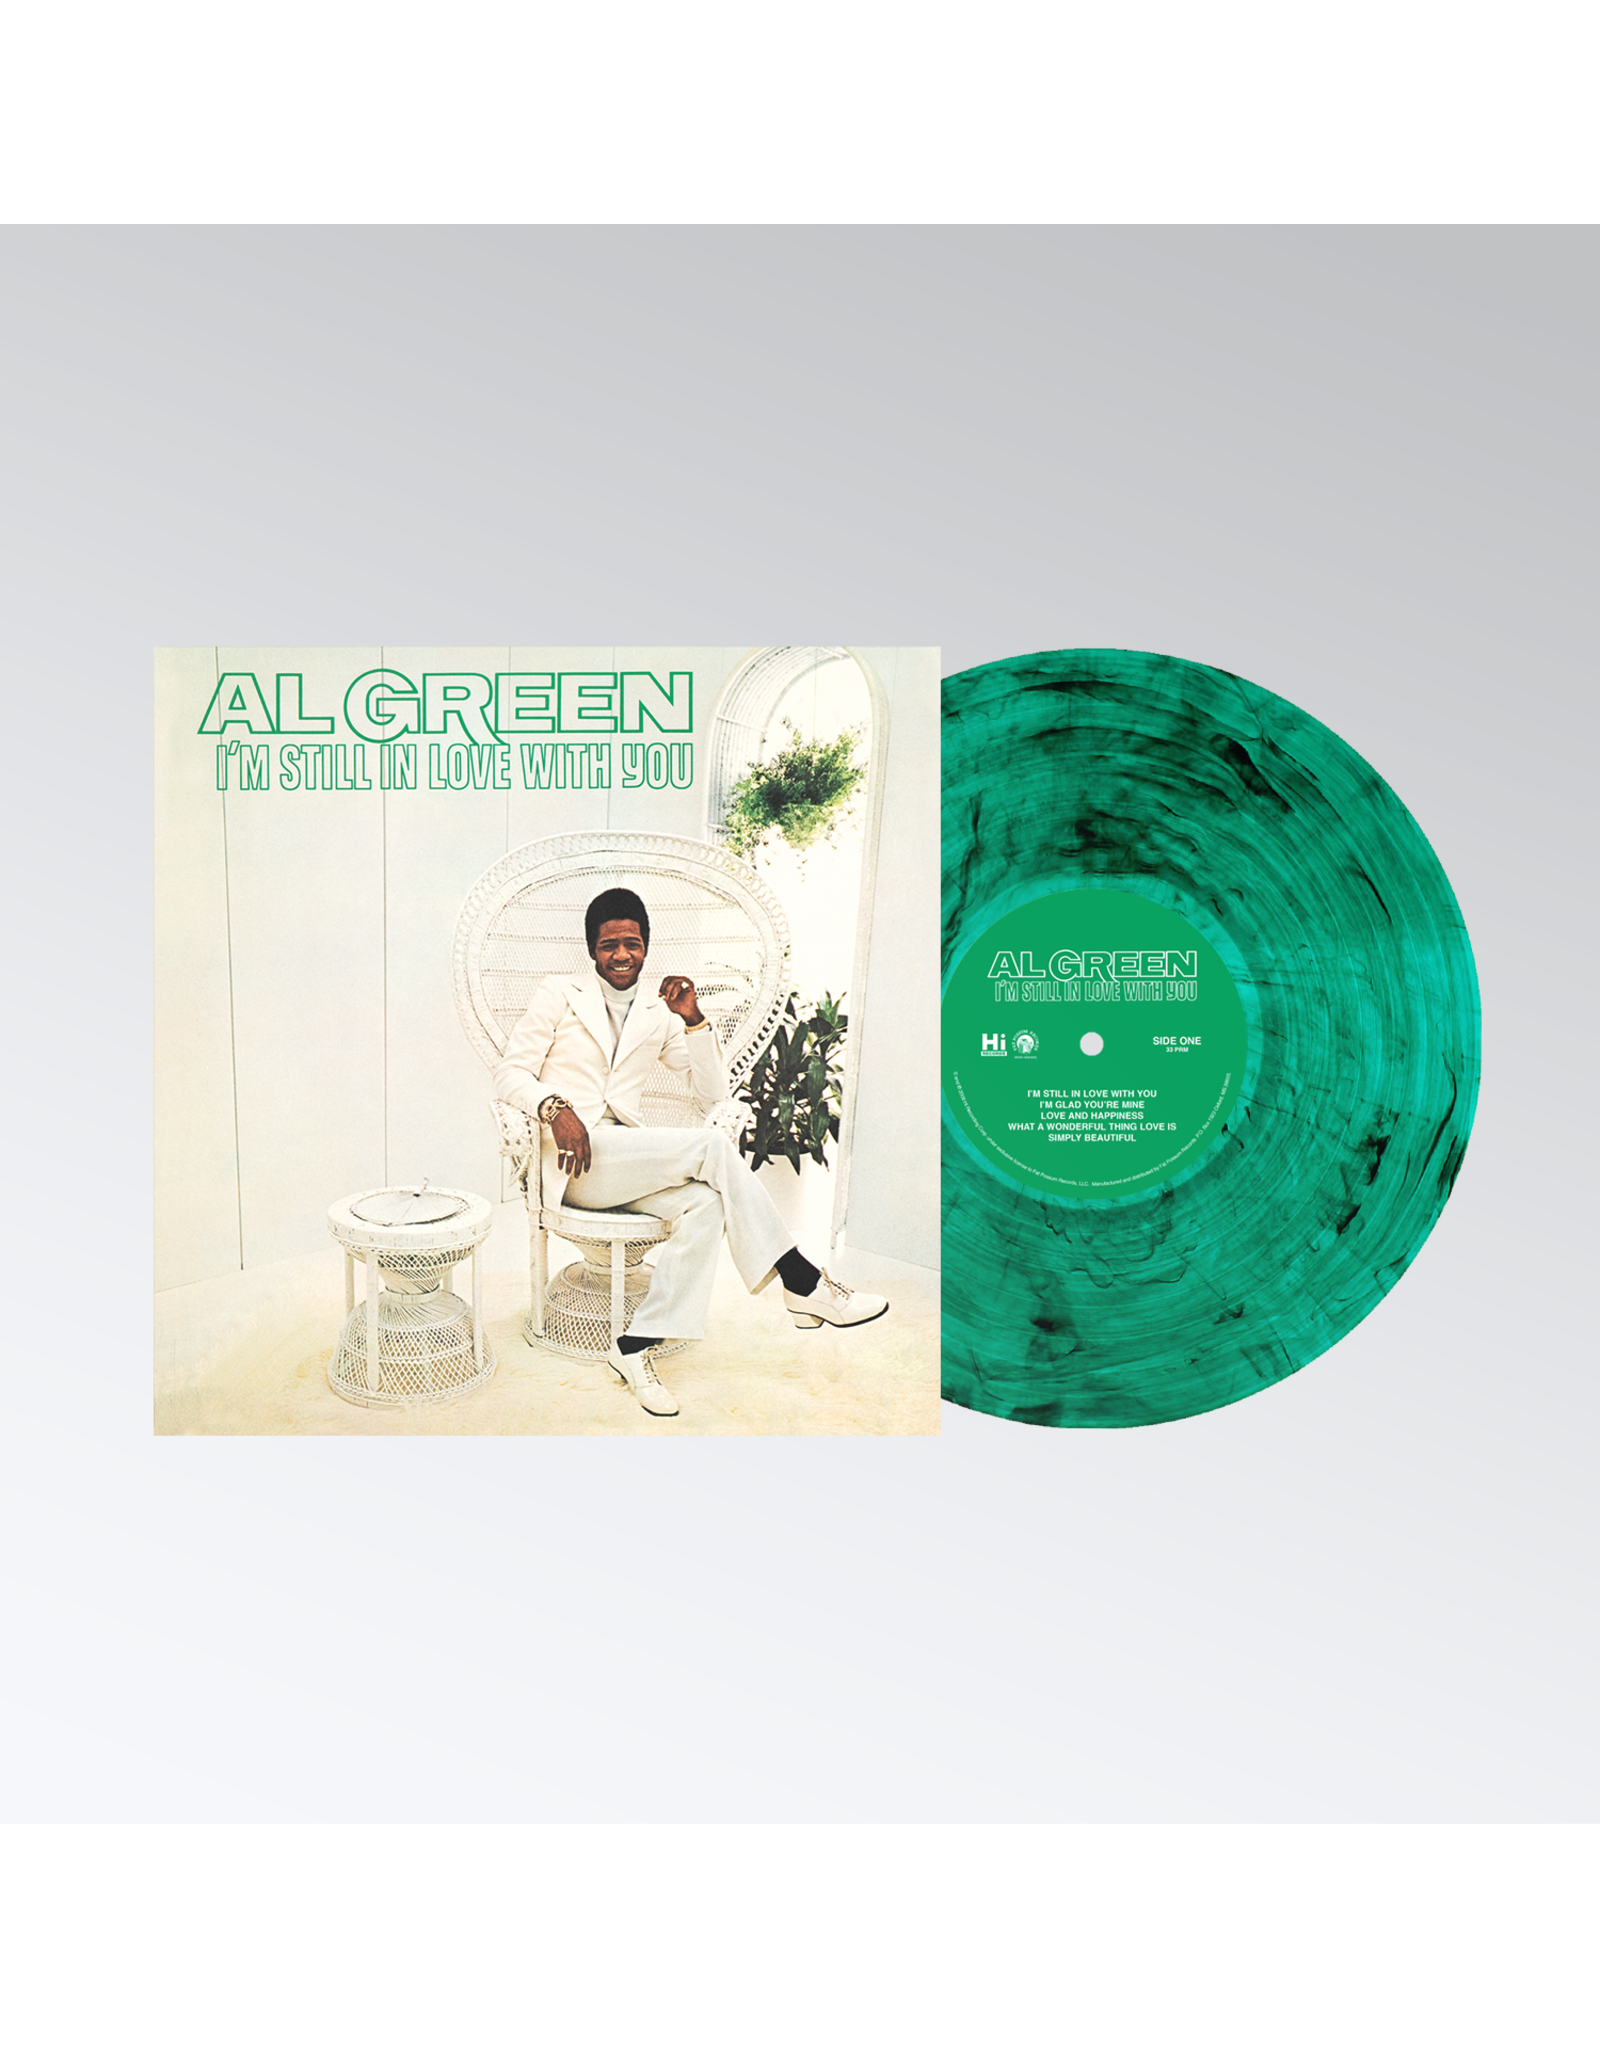 Al Green - I'm Still In Love With You (50th Anniversary) [Exclusive Green Vinyl]